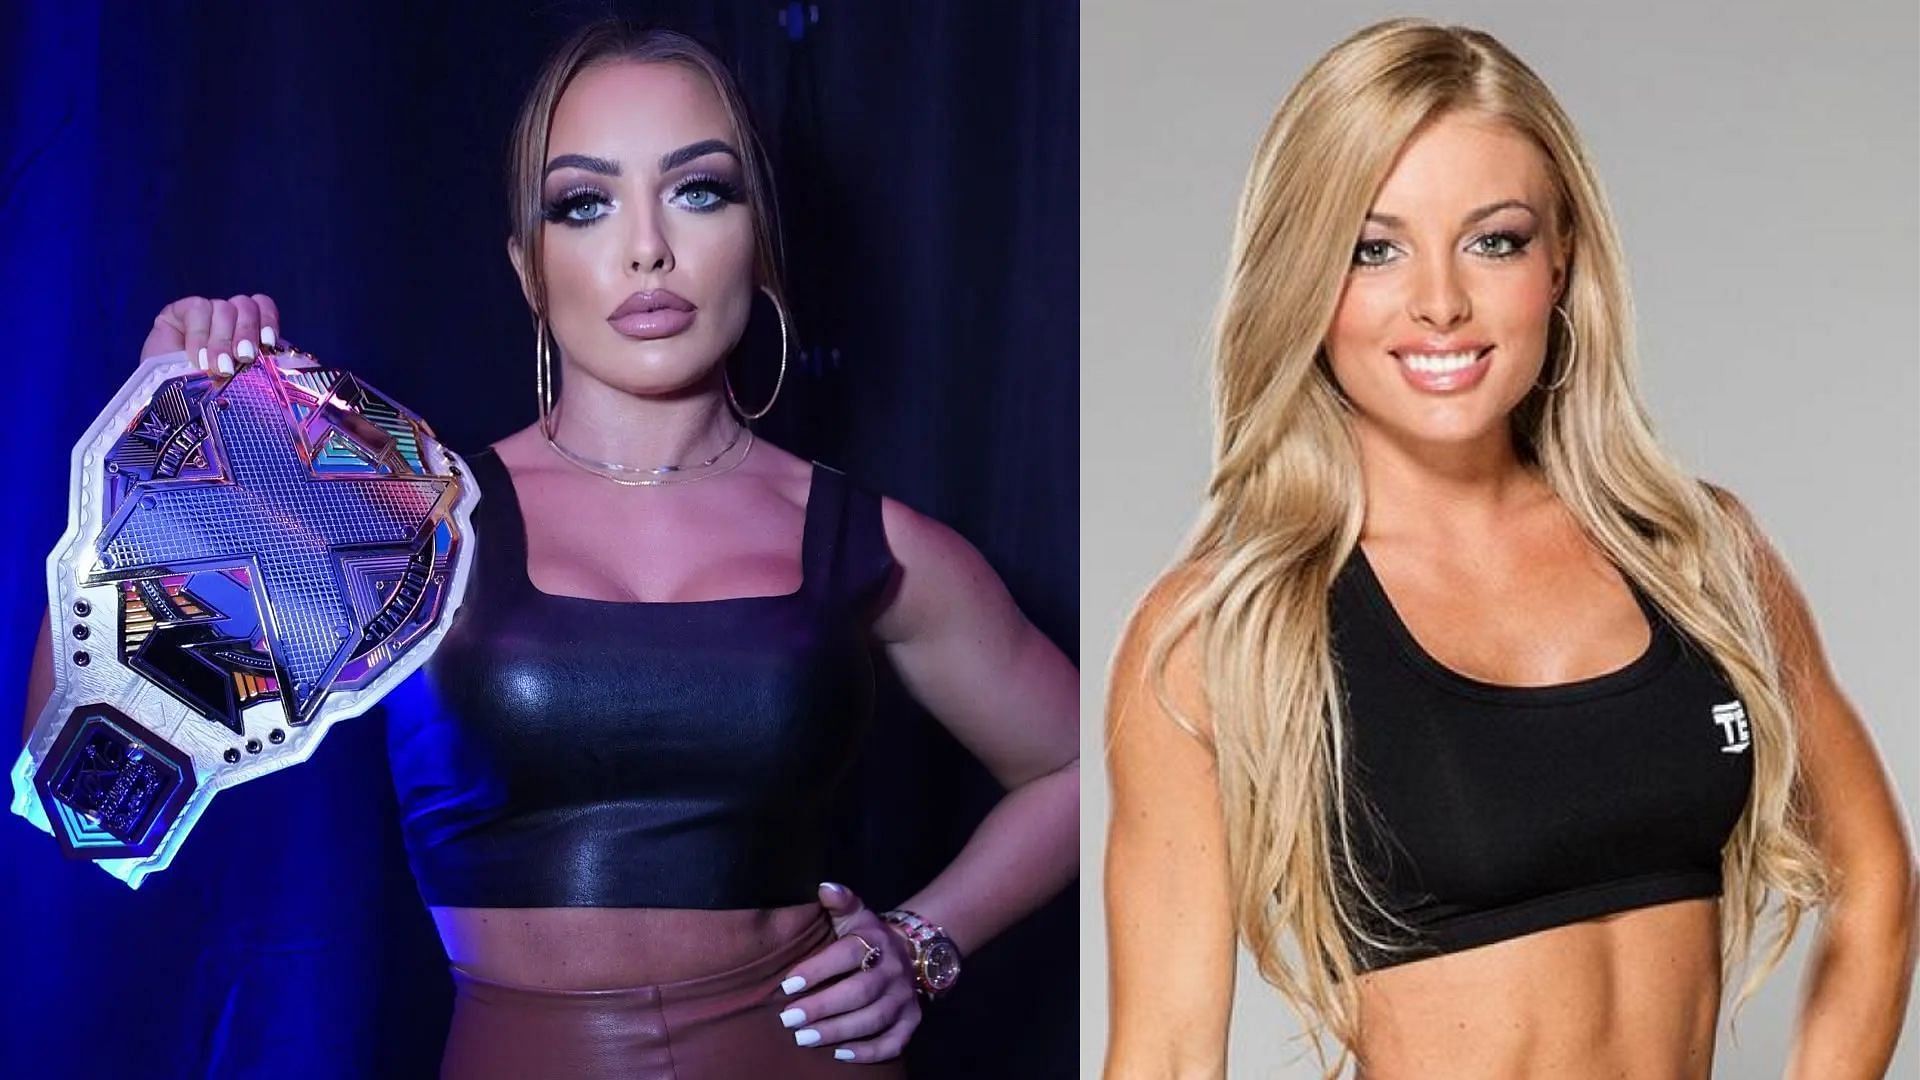 Mandy Rose has been released by WWE on December 14, 2022